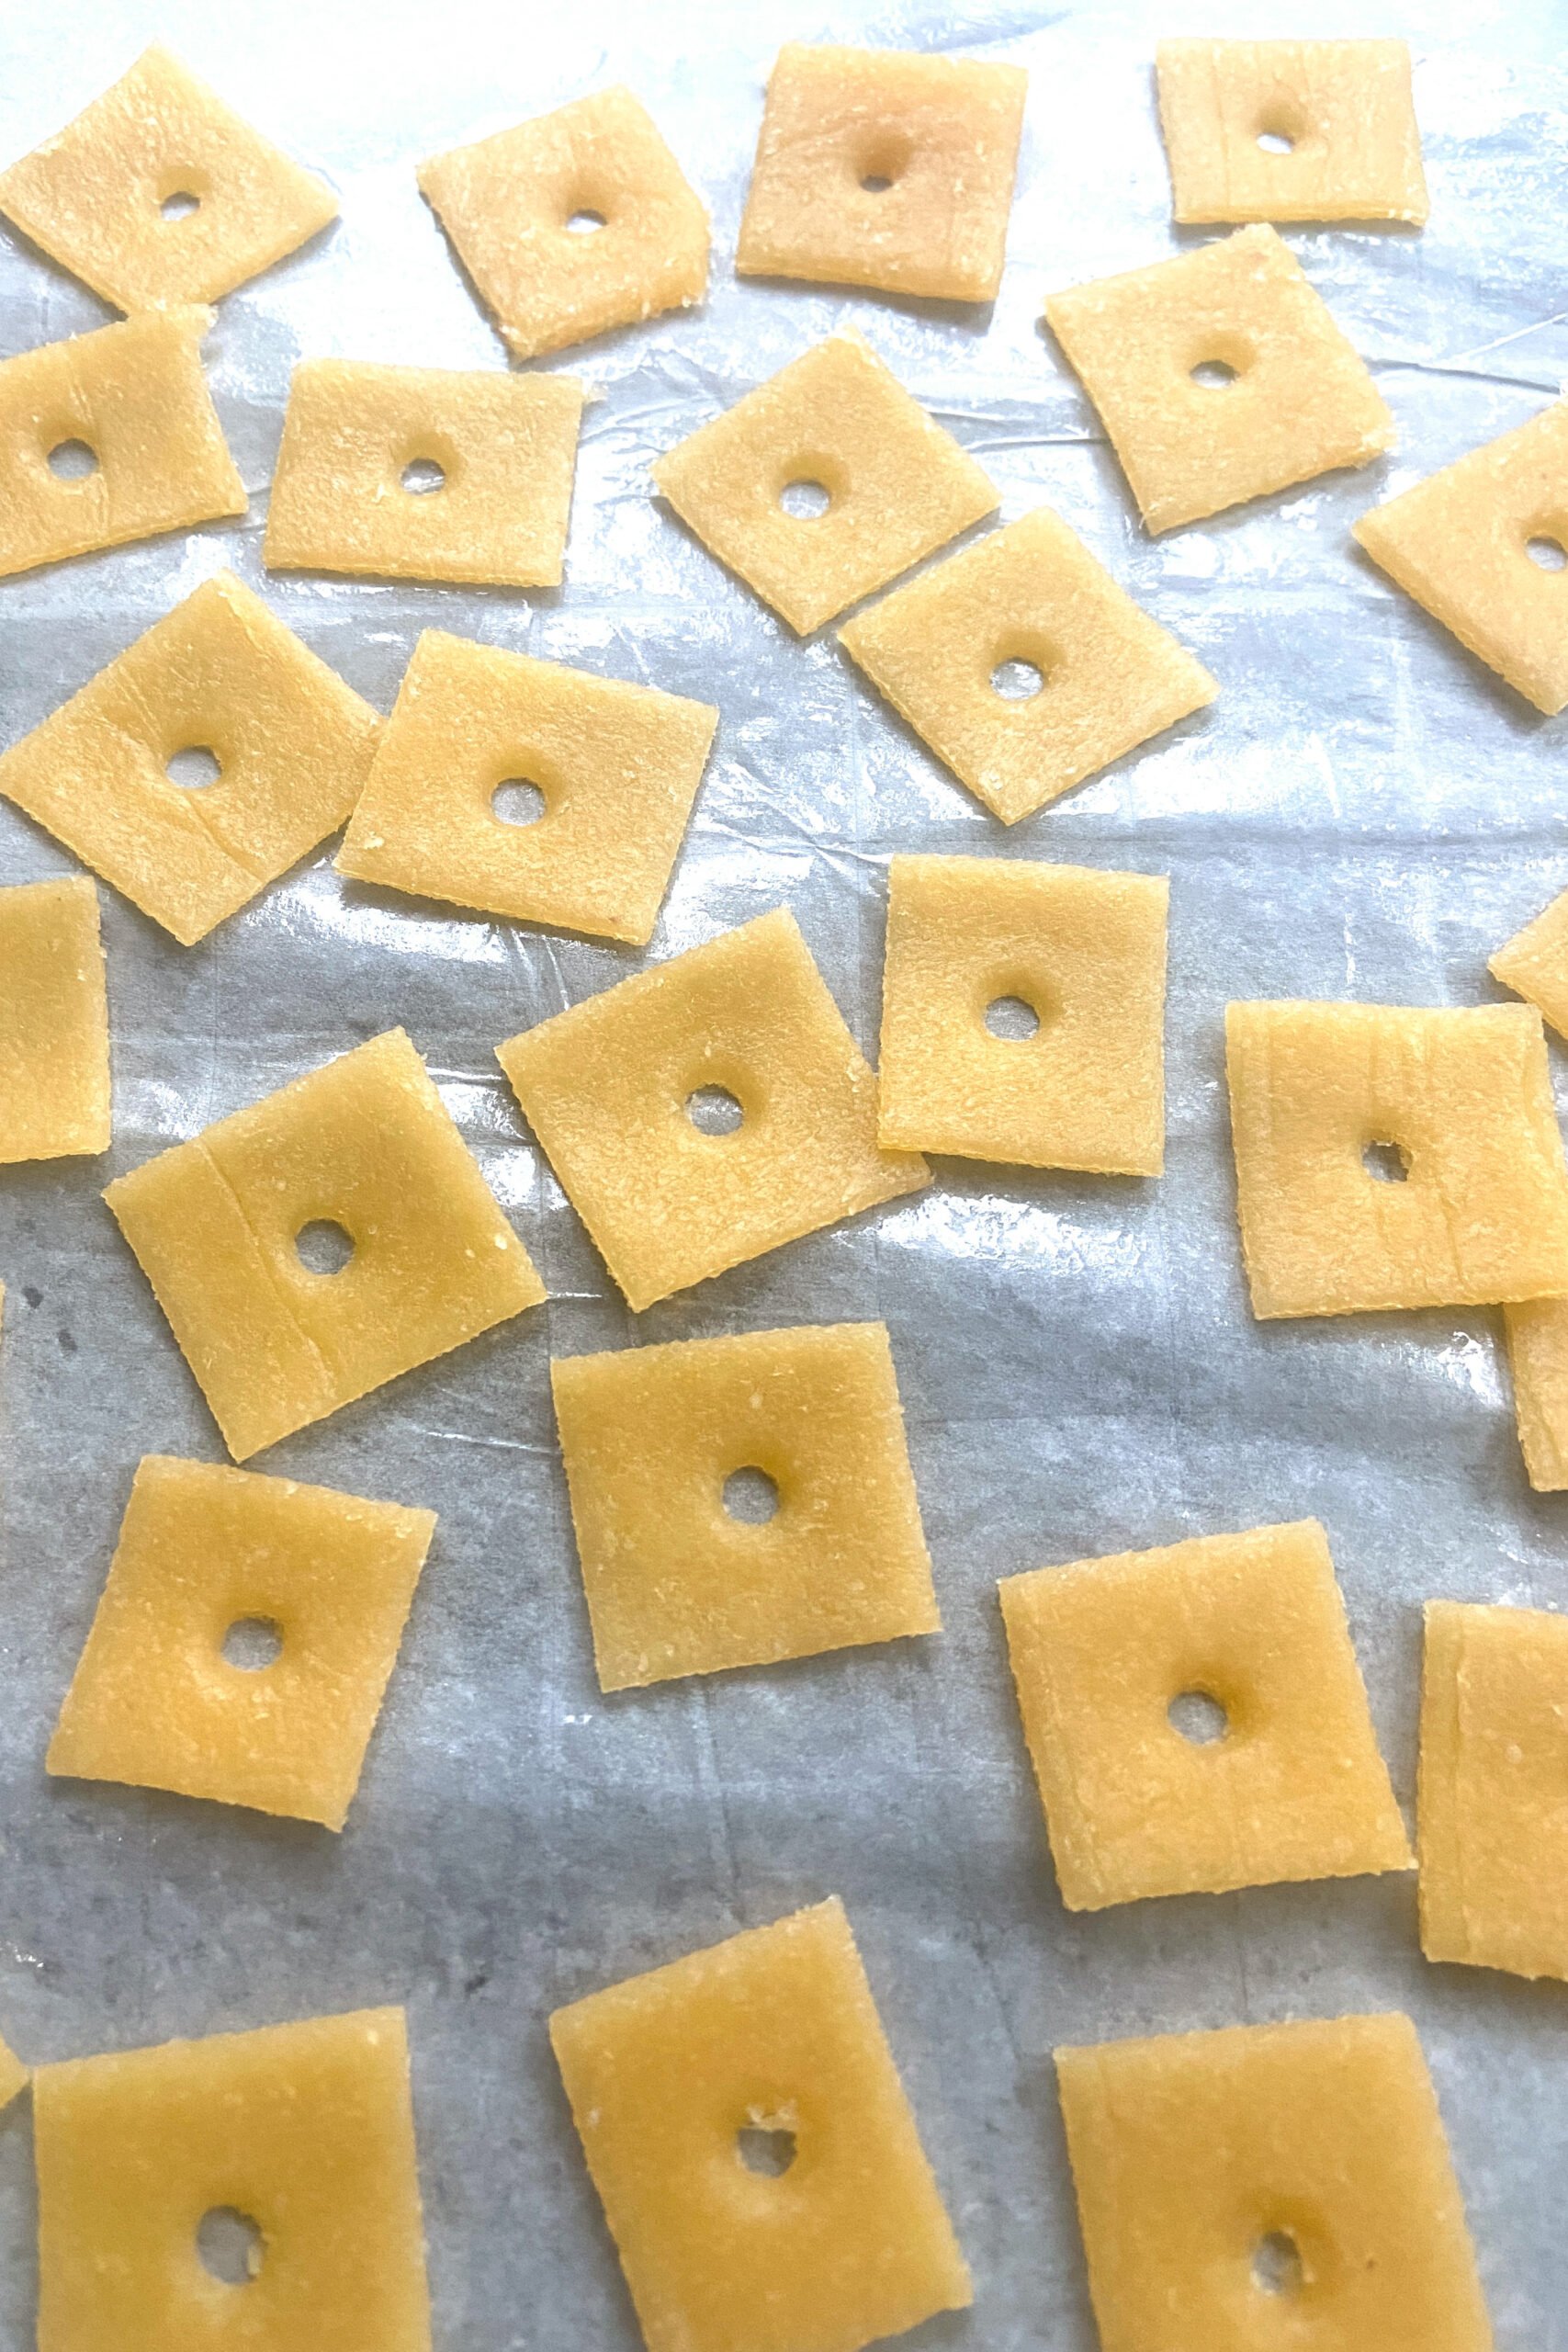 Homemade cheez-it crackers ready to go into the oven